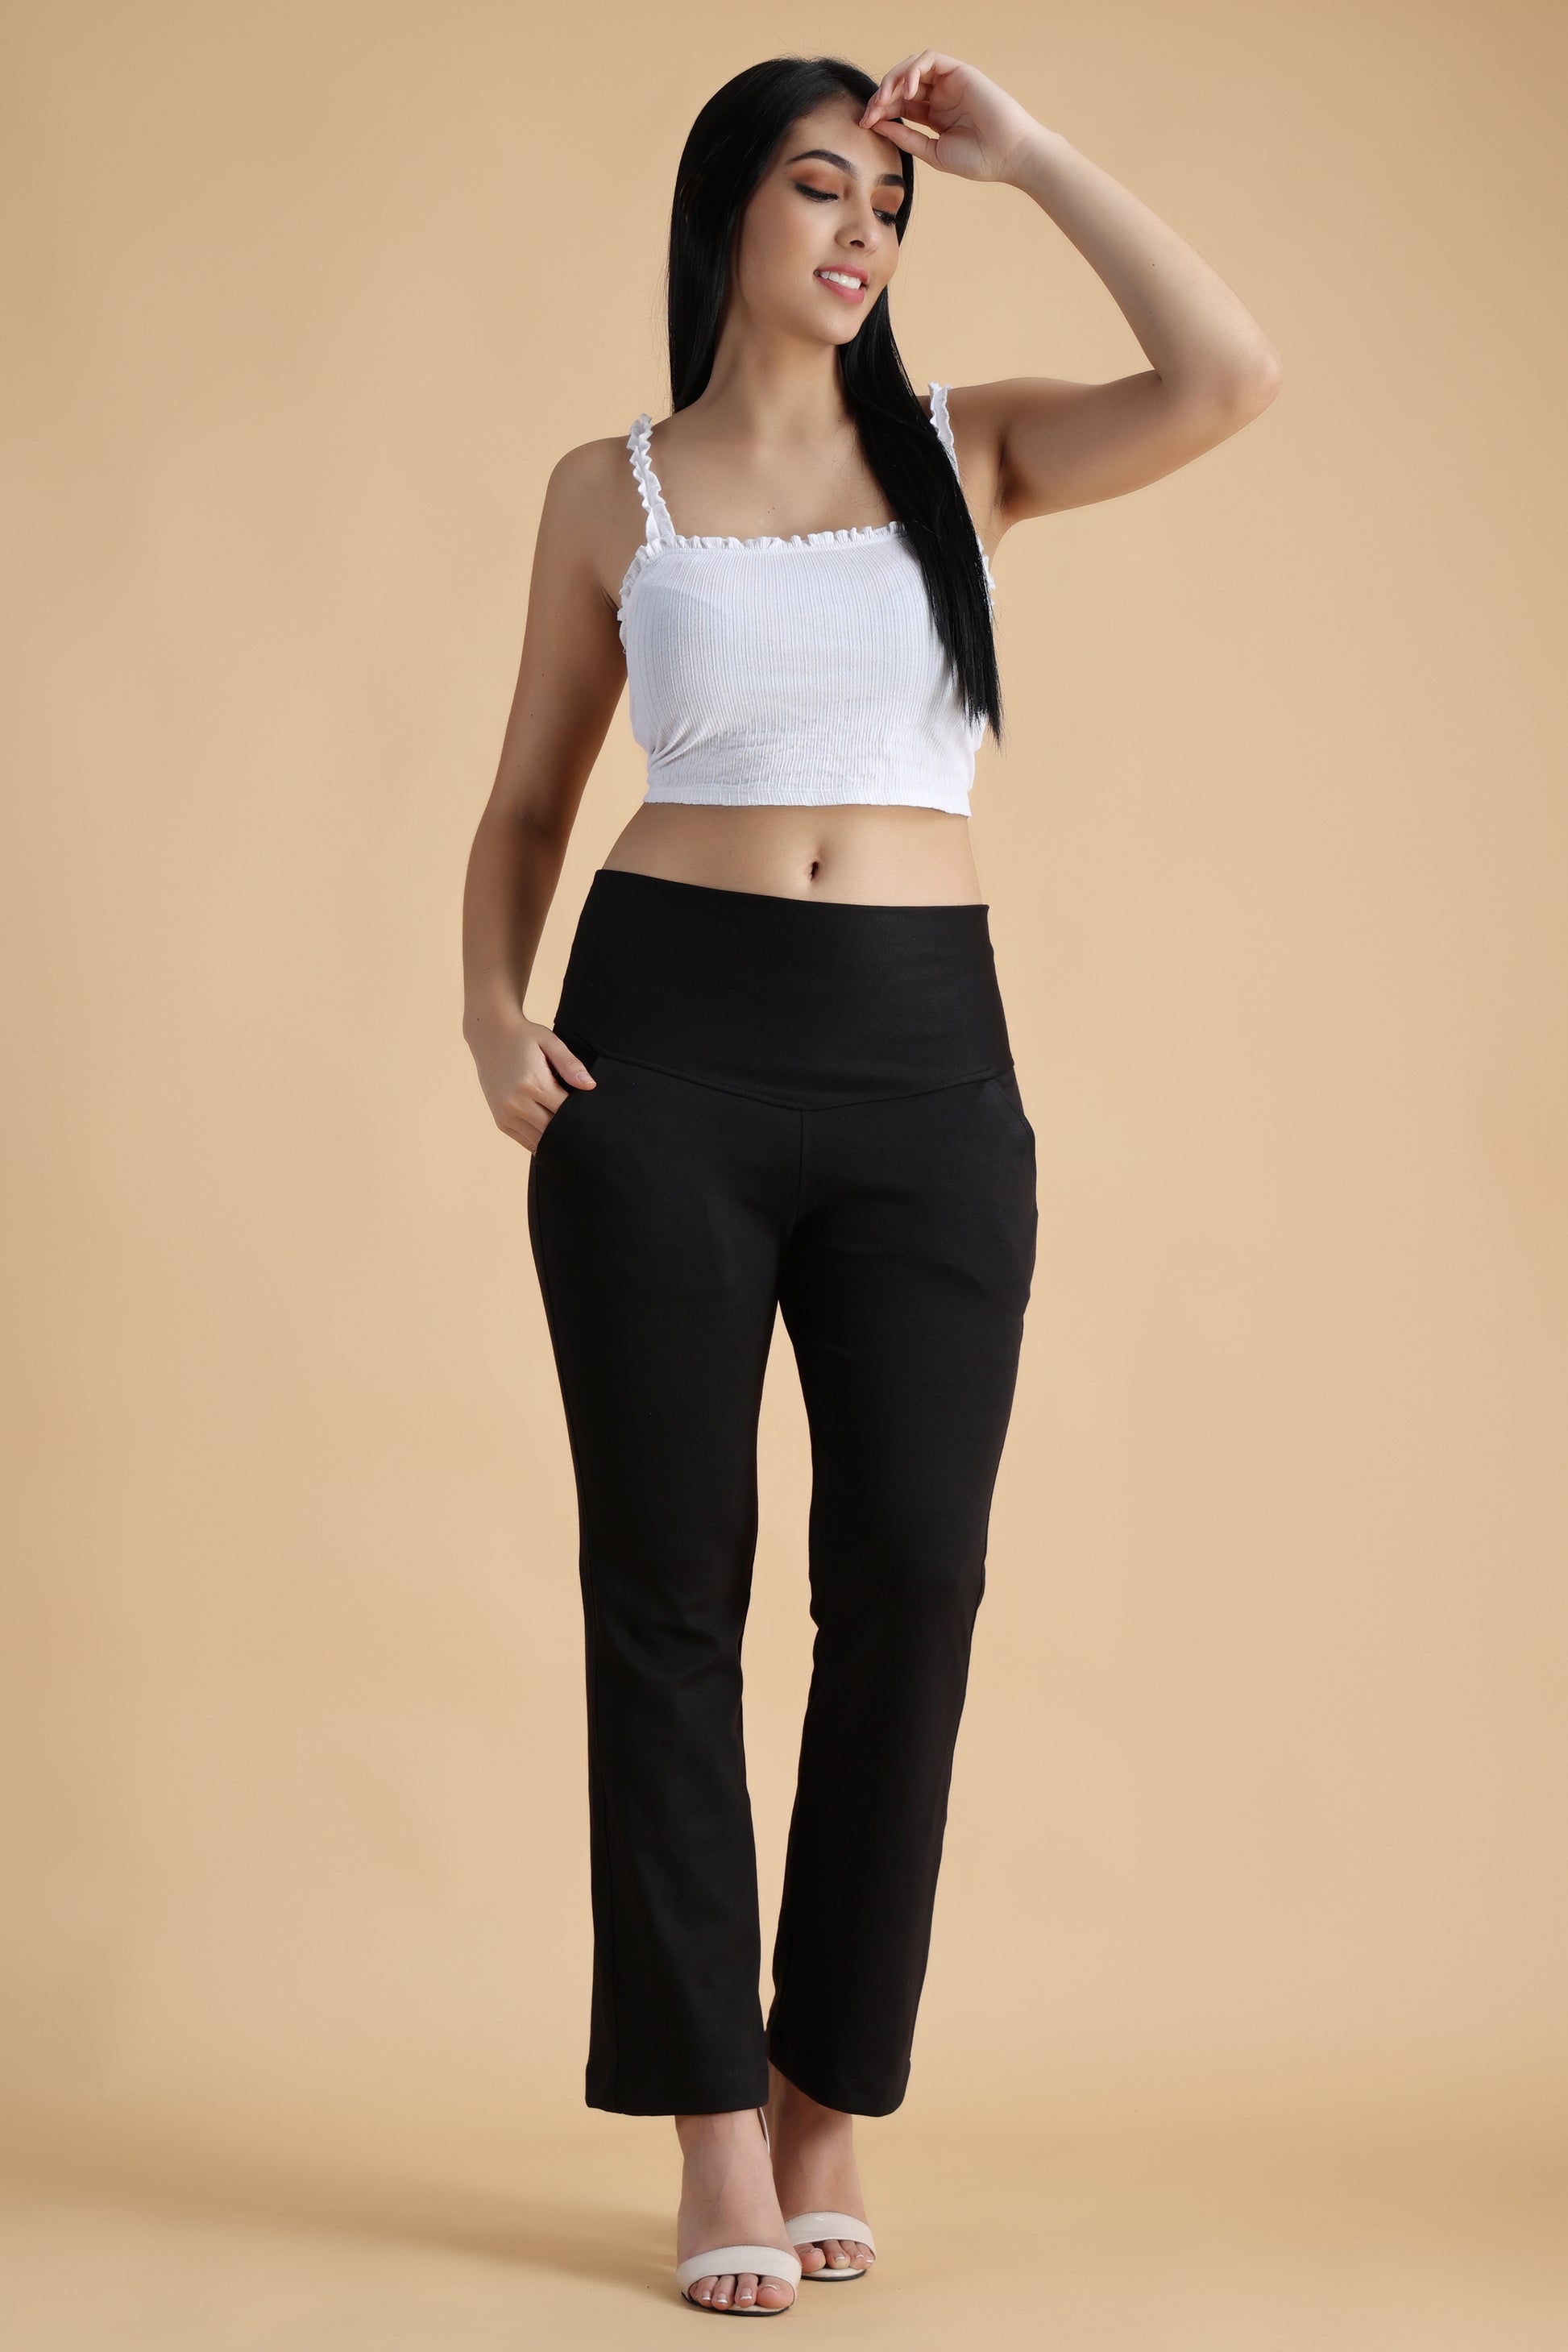 Plus Size Black New Fit Tummy Tucker Crop Pants Online in India